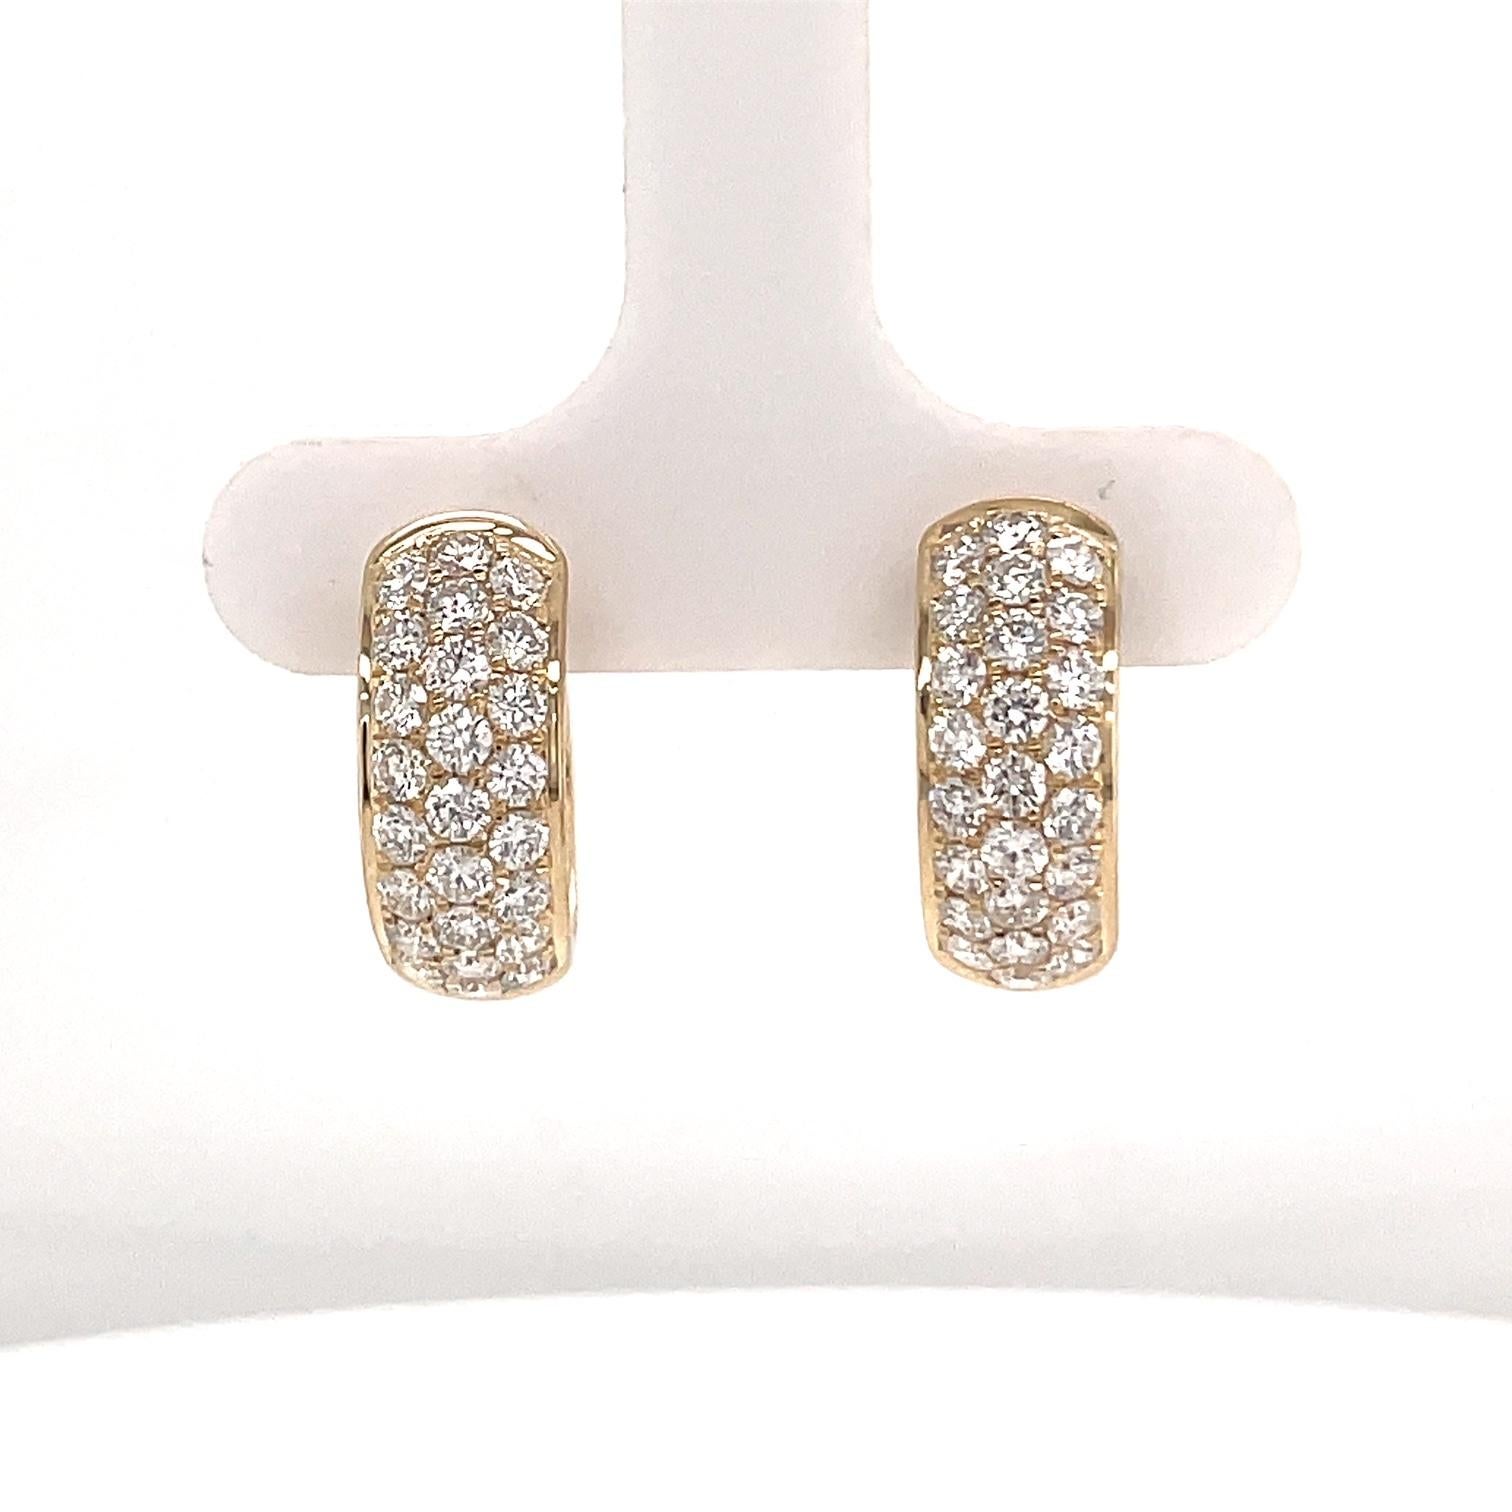 Three Row Diamond Hoop Earrings 1.50 Carats 14 Karat Rose Gold 4.6 Grams In New Condition For Sale In New York, NY